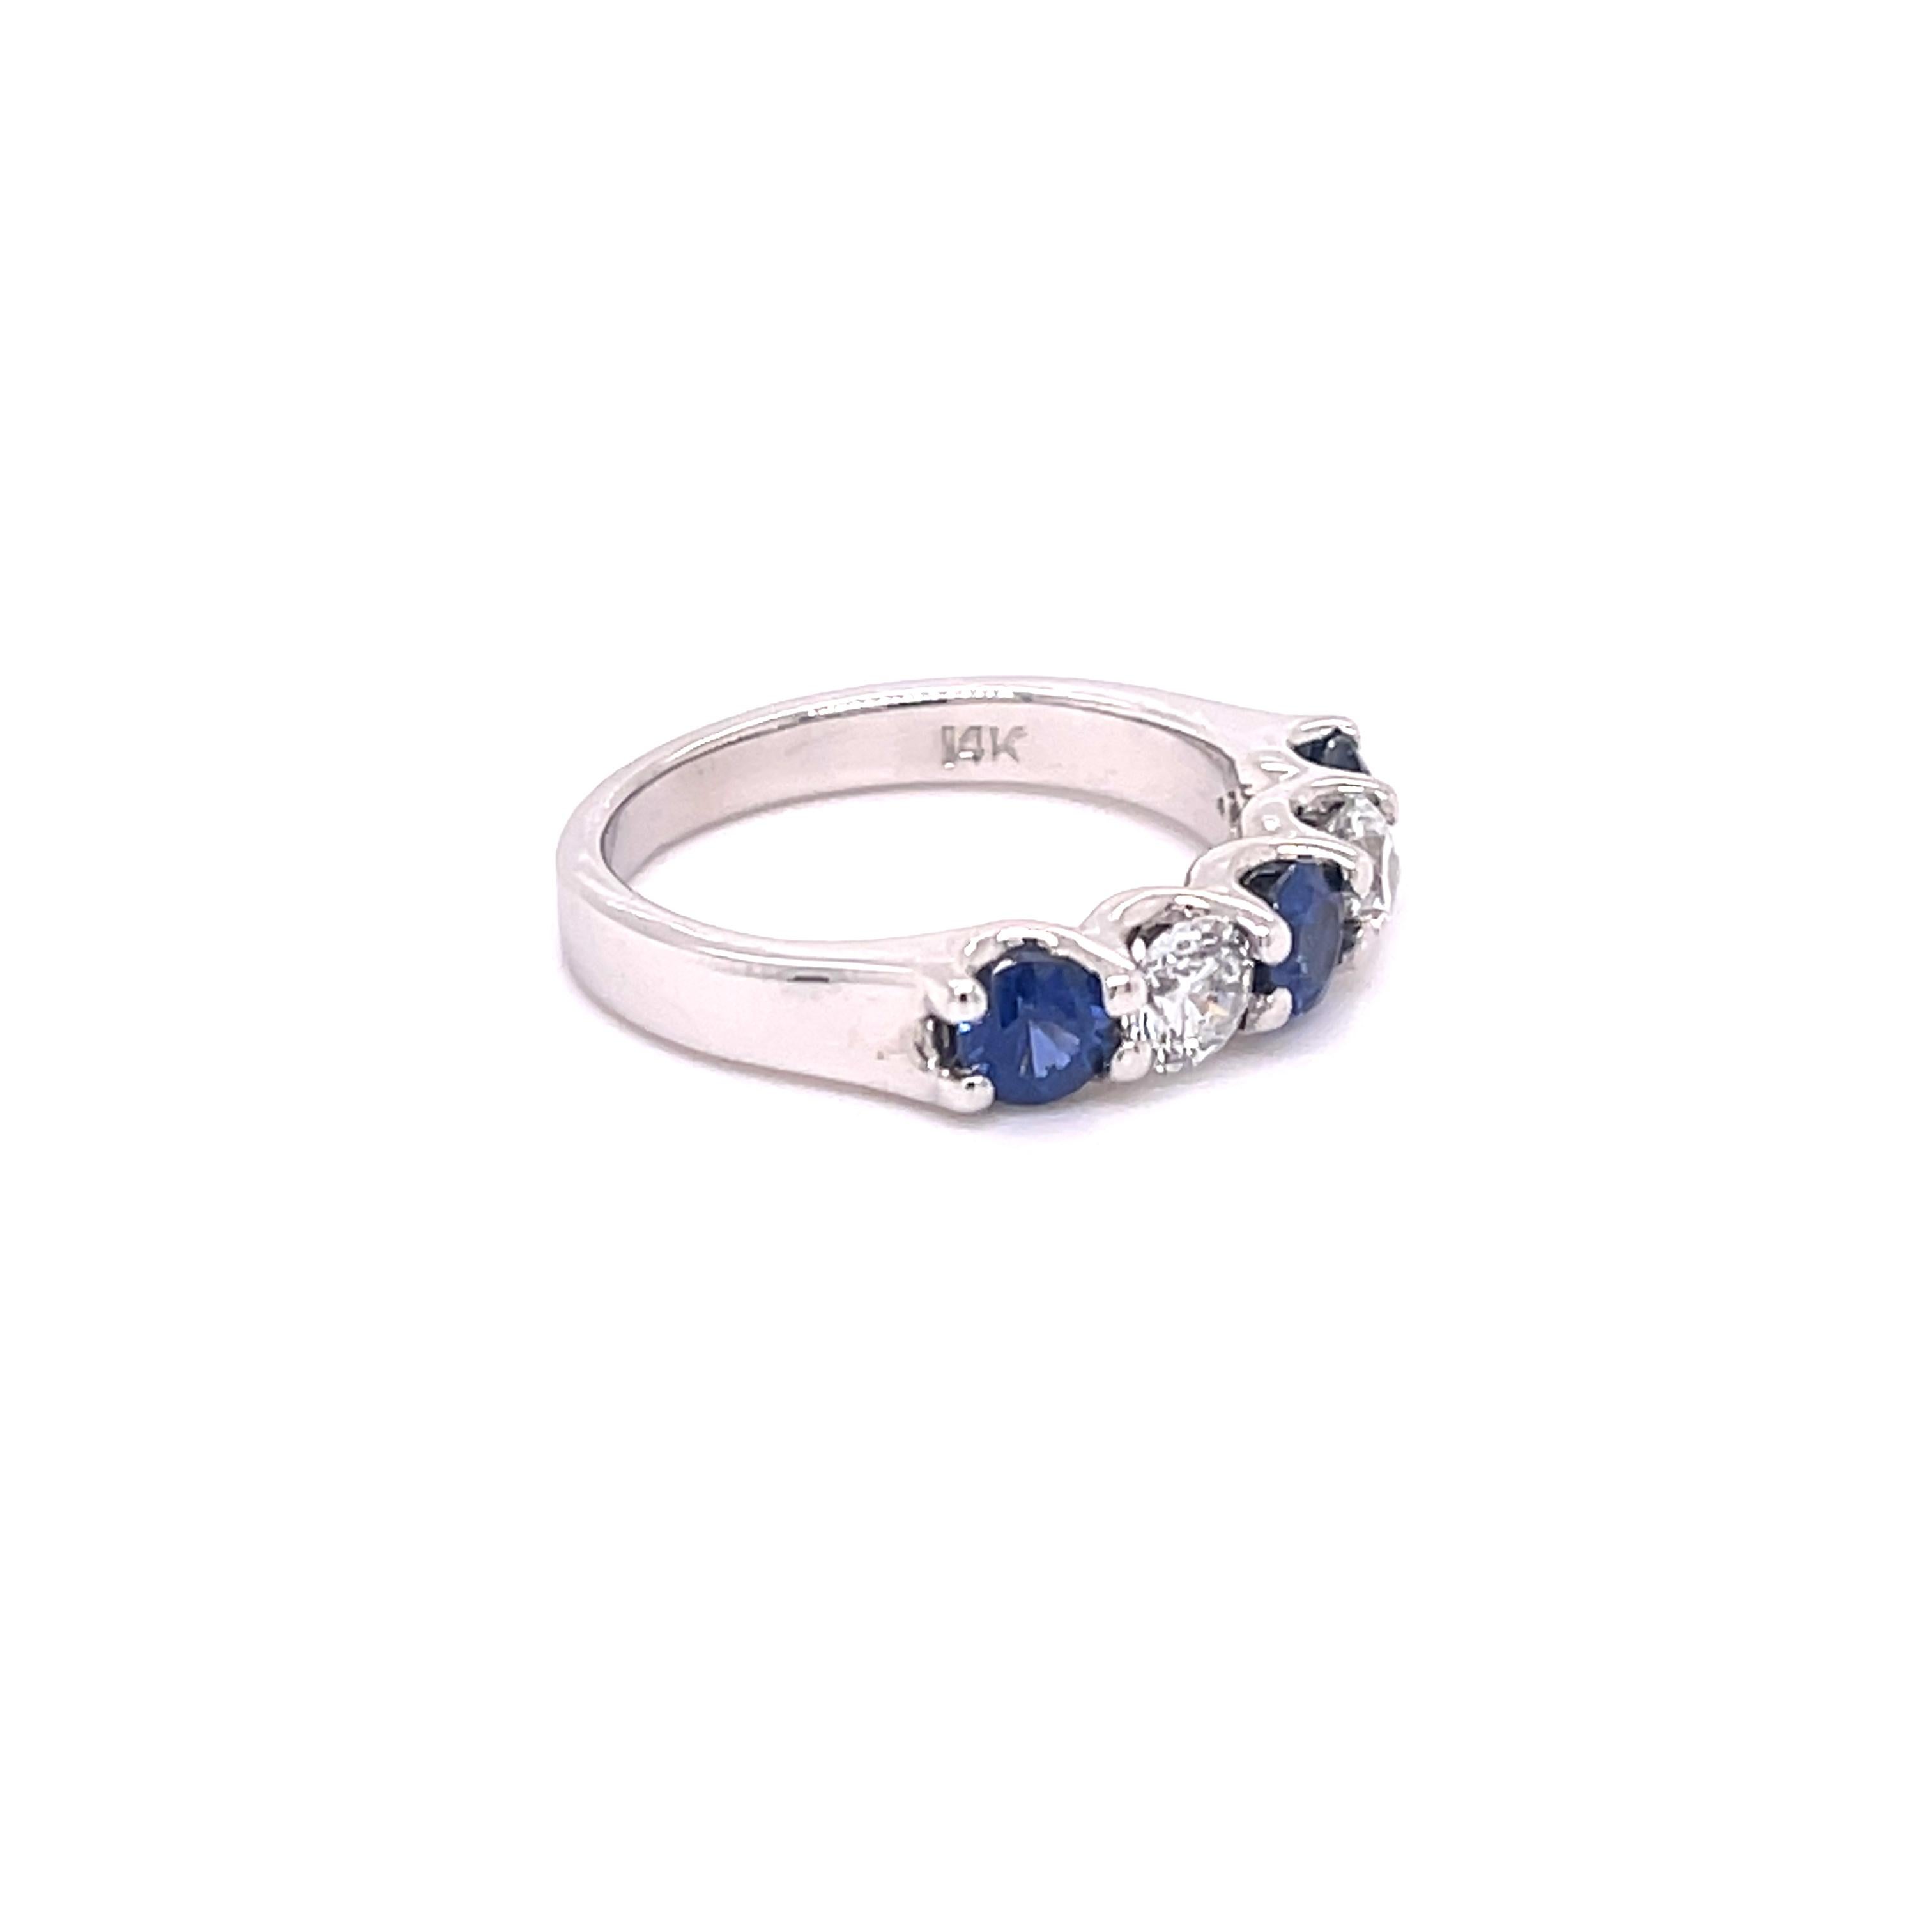 Sapphire and diamond band in 14K white gold. The band features 0.77ctw of round sapphires and 0.50ctw of round diamonds. Size 5.75, can be sized. Stamped 14K.